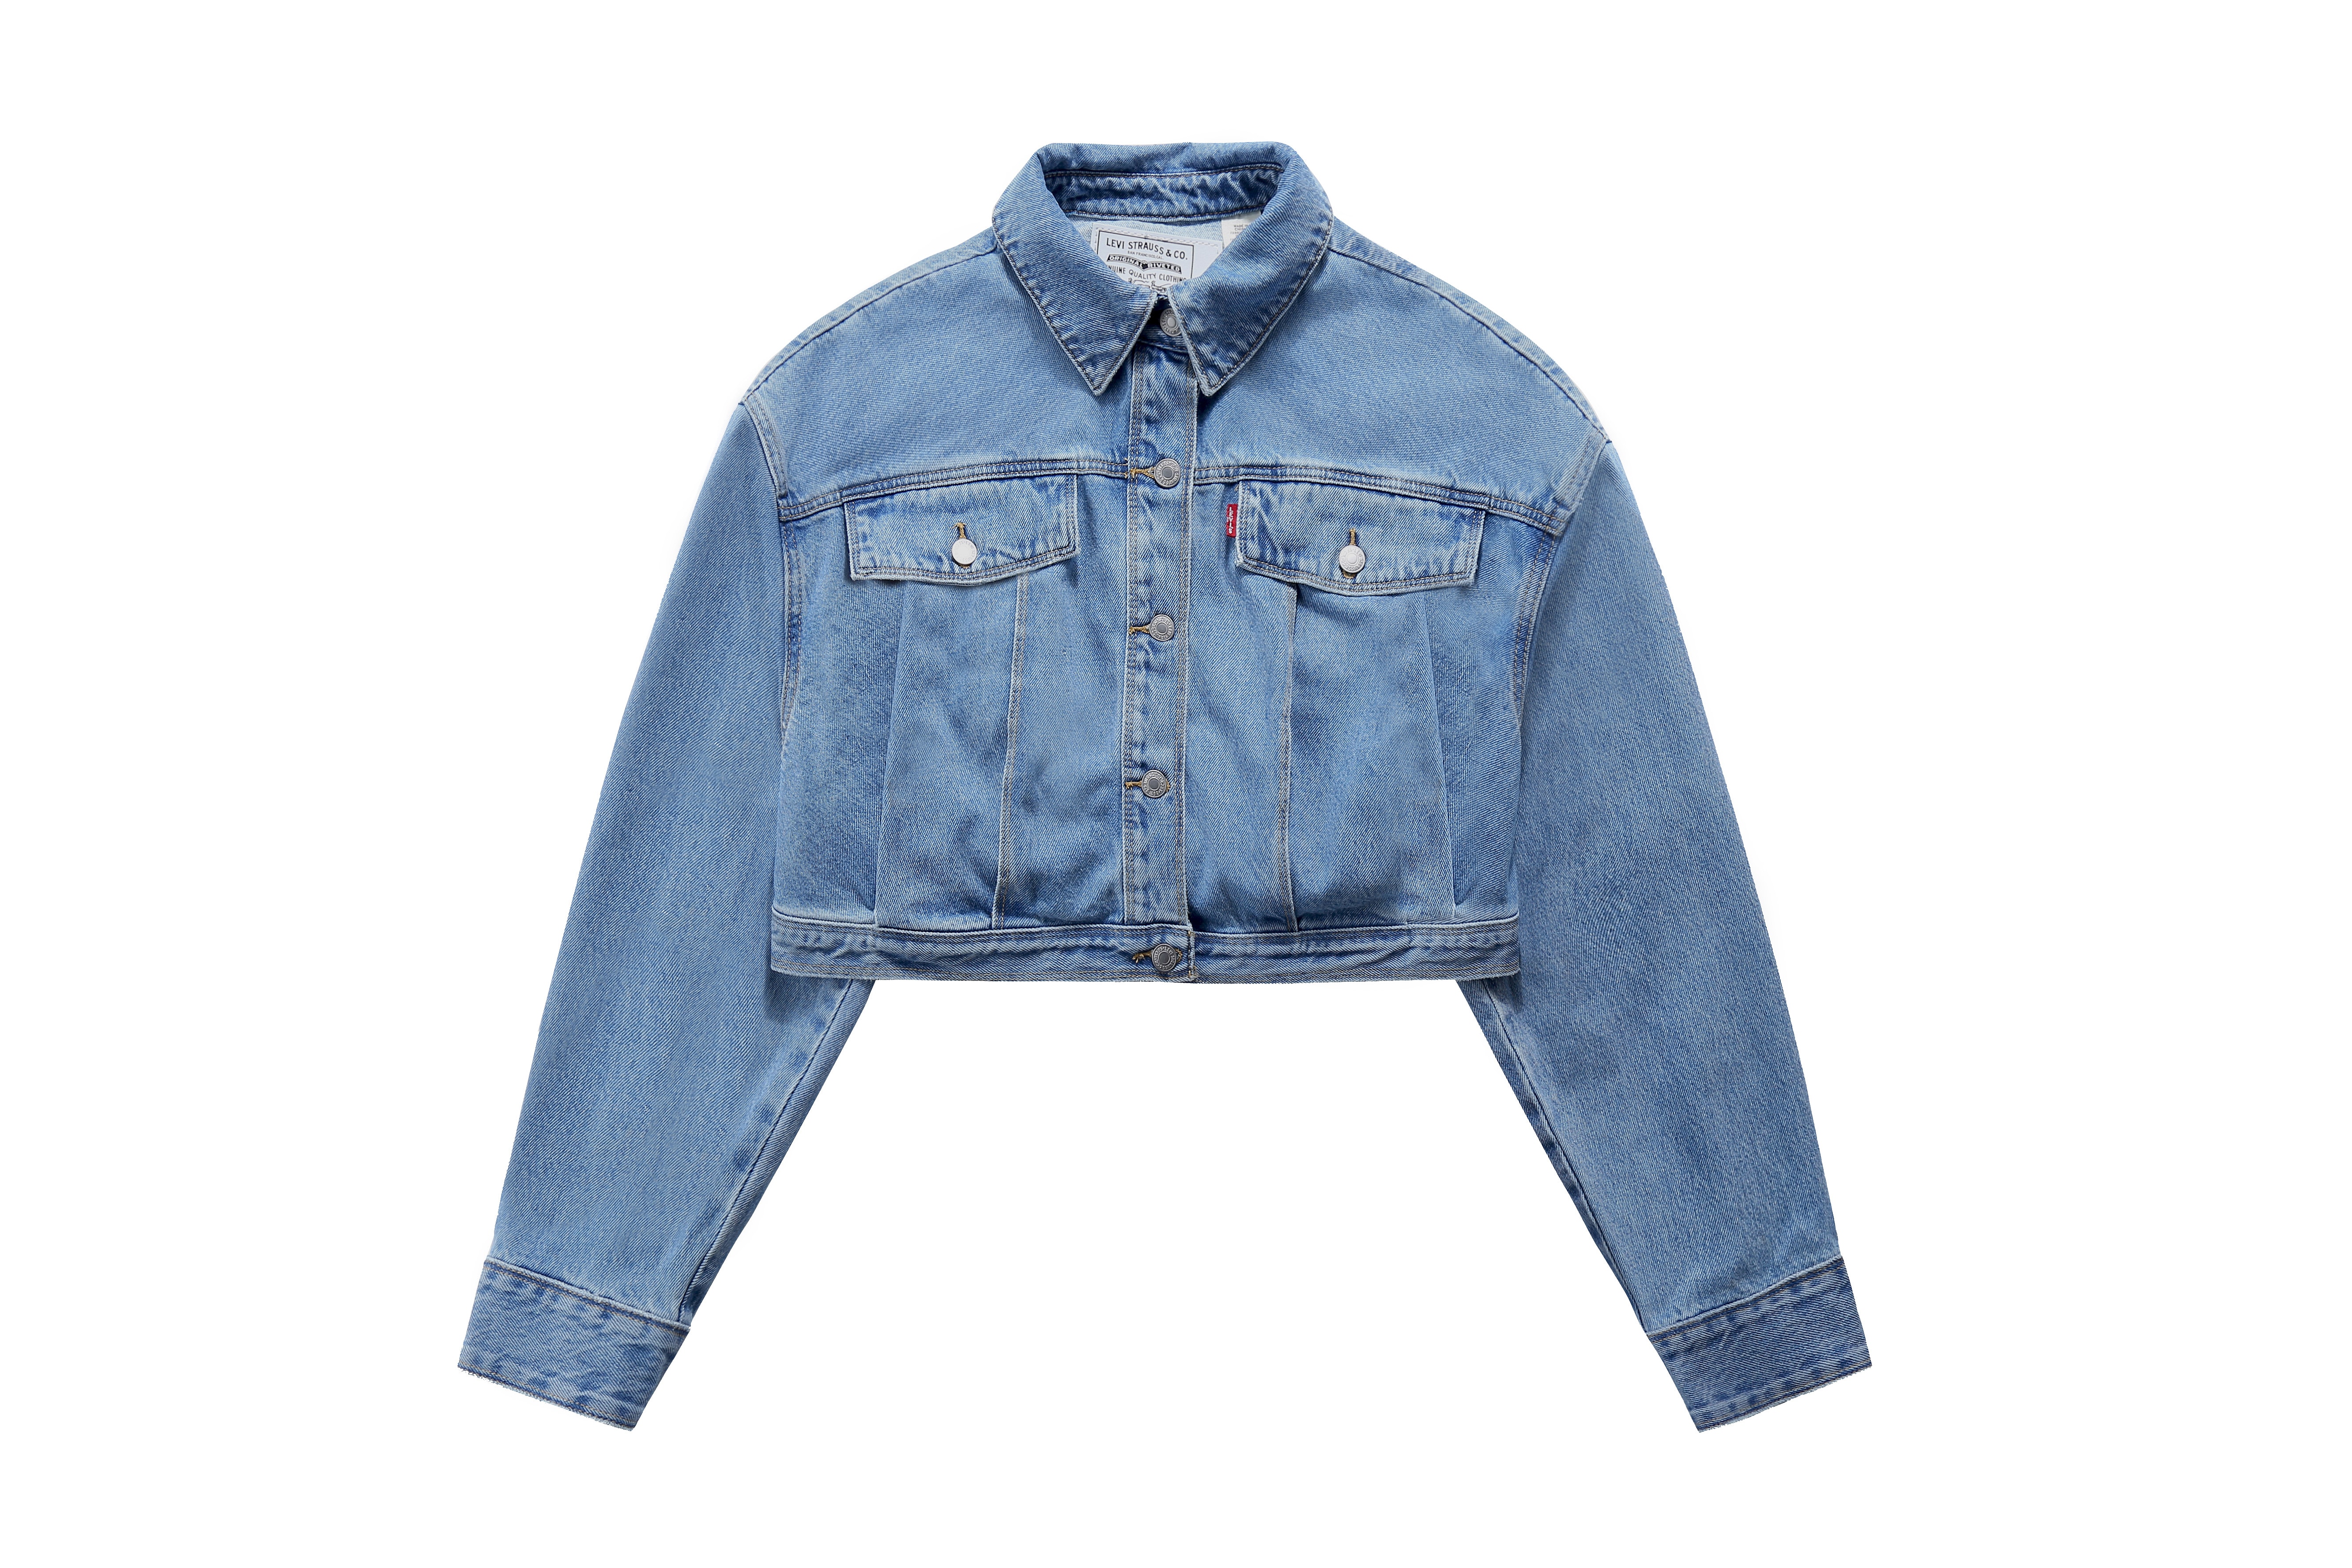 Feng Cheng Wang x Levis Collaboration Release Denim Repurposed 